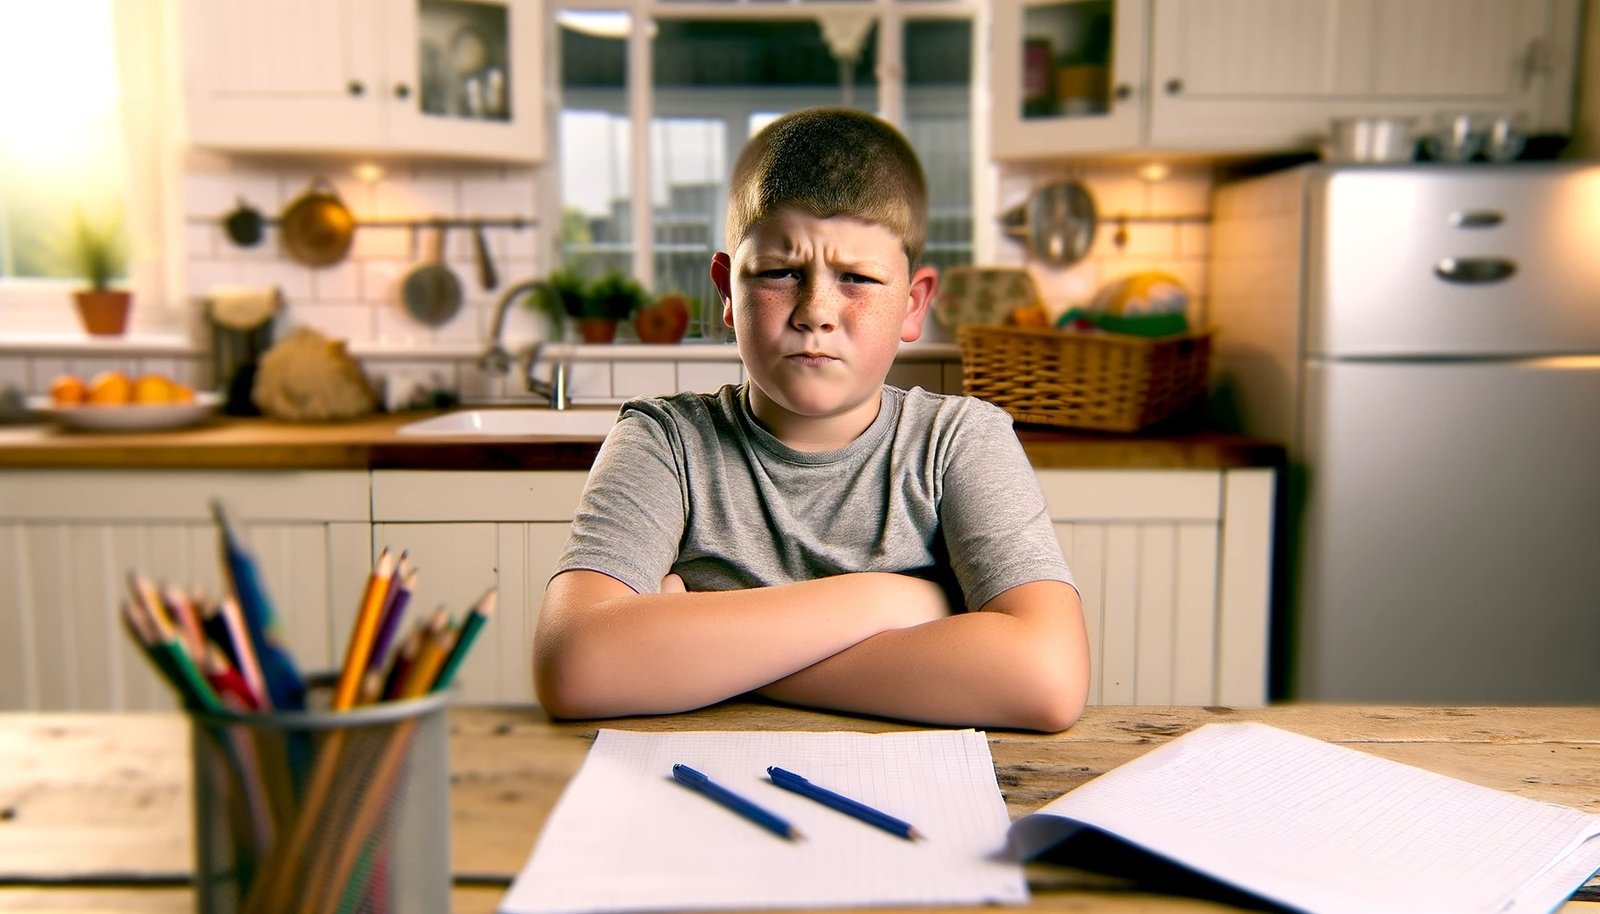 A 10-year-old boy sitting at the kitchen table refusing to do his schoolwork.